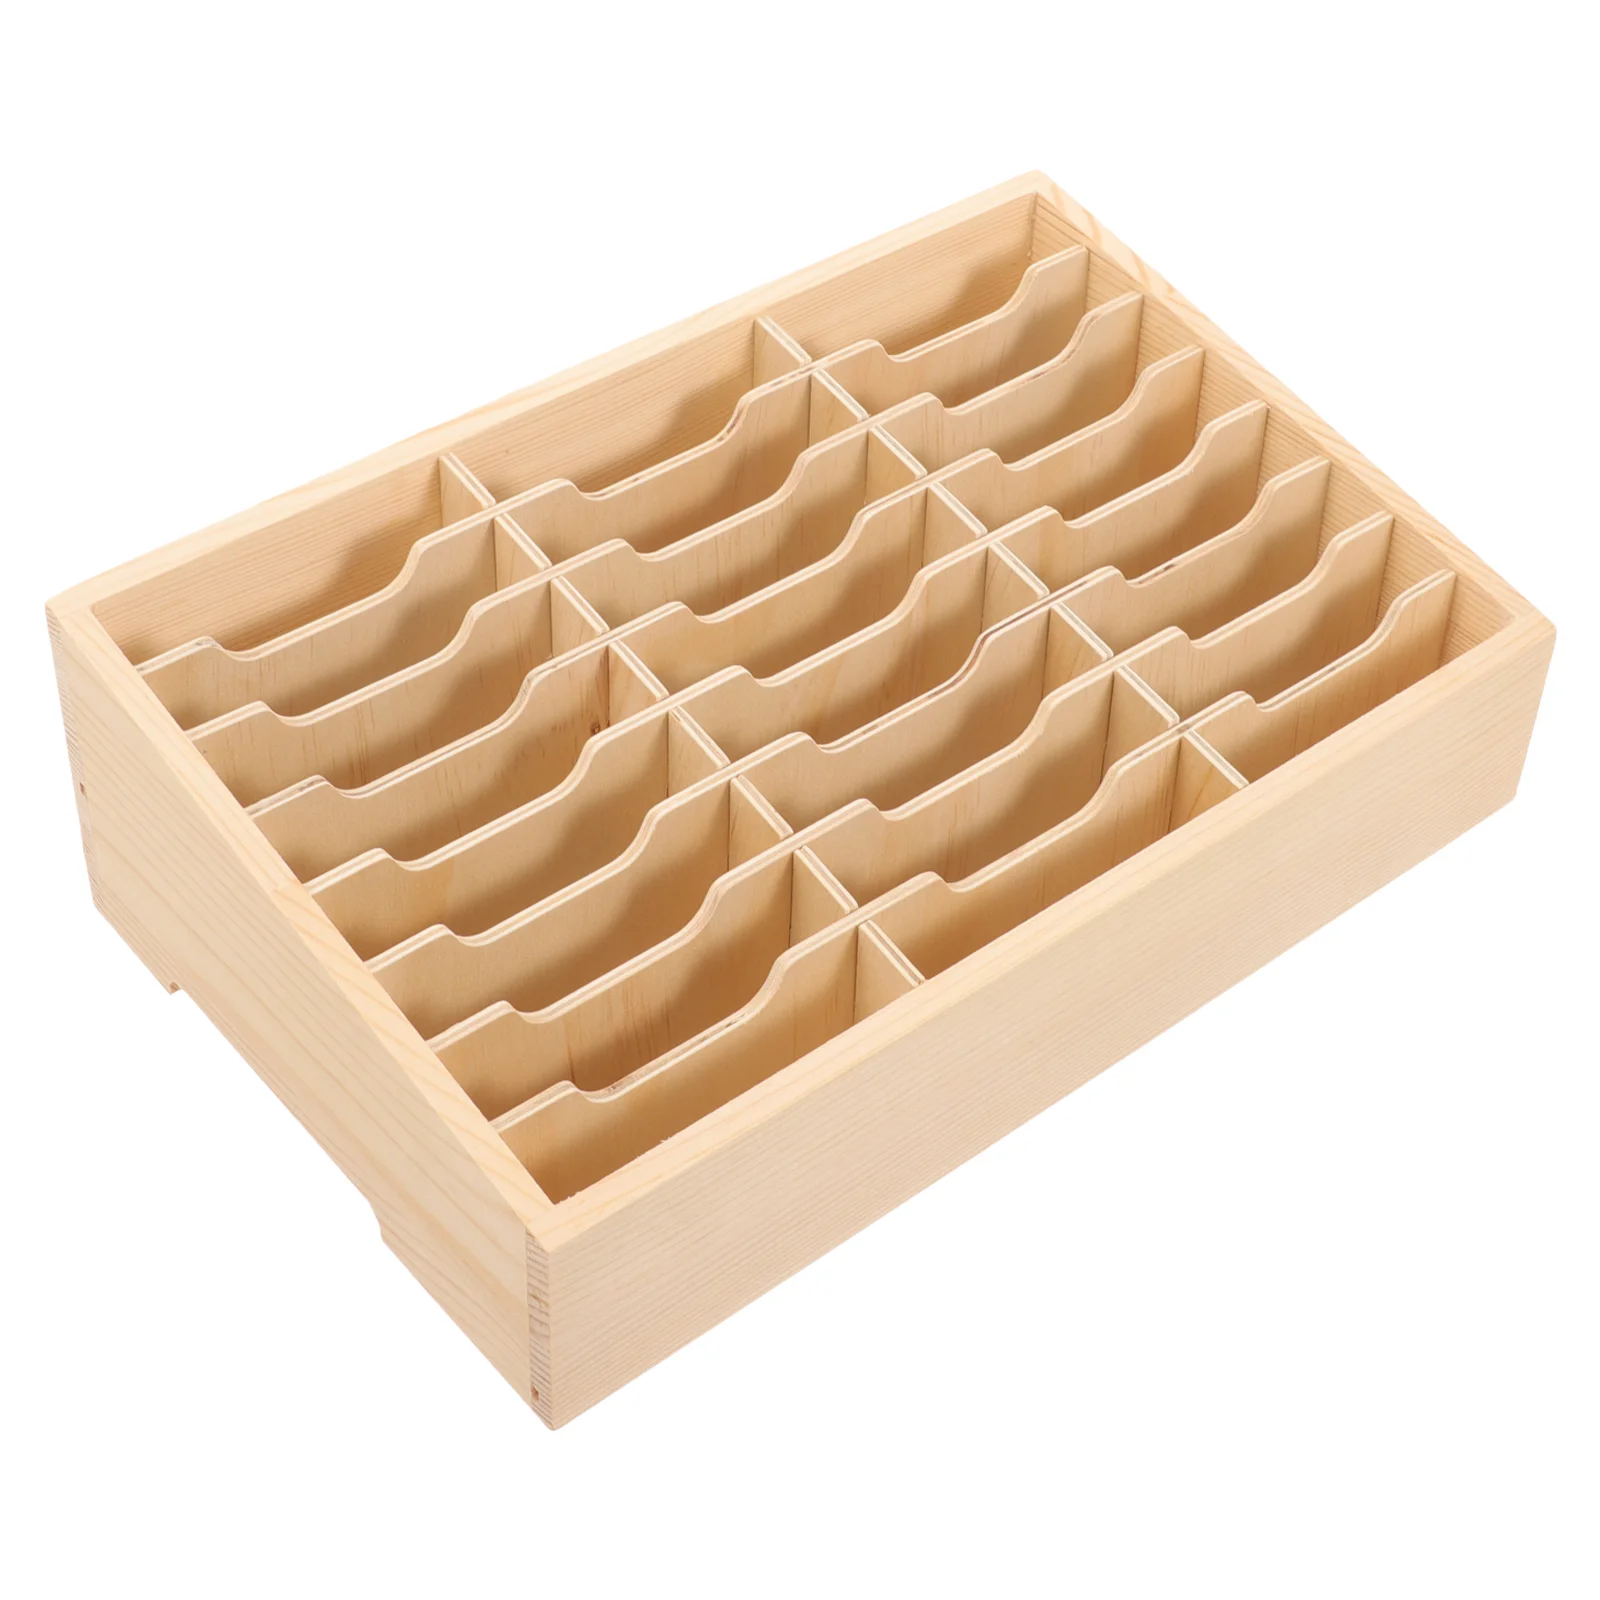 

Multi-grid Mobile Phone Management Rack Storage Box Case Vanity Organizer Holder Pocket Cell Classroom Temporary Wooden Office